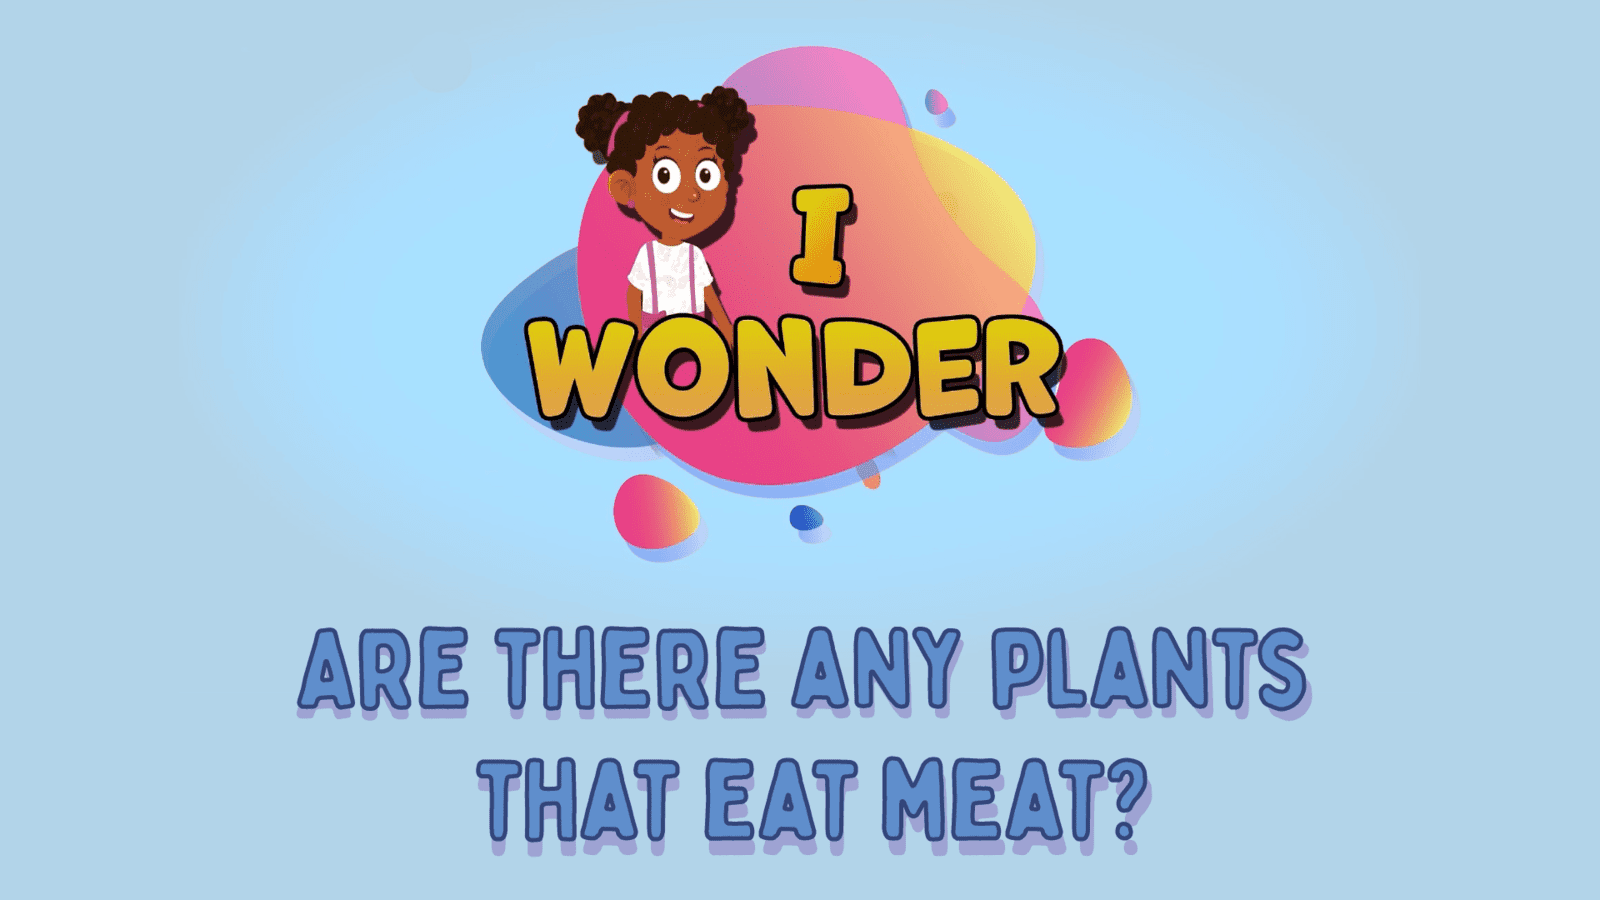 Are There Any Plants That Eat Meat?